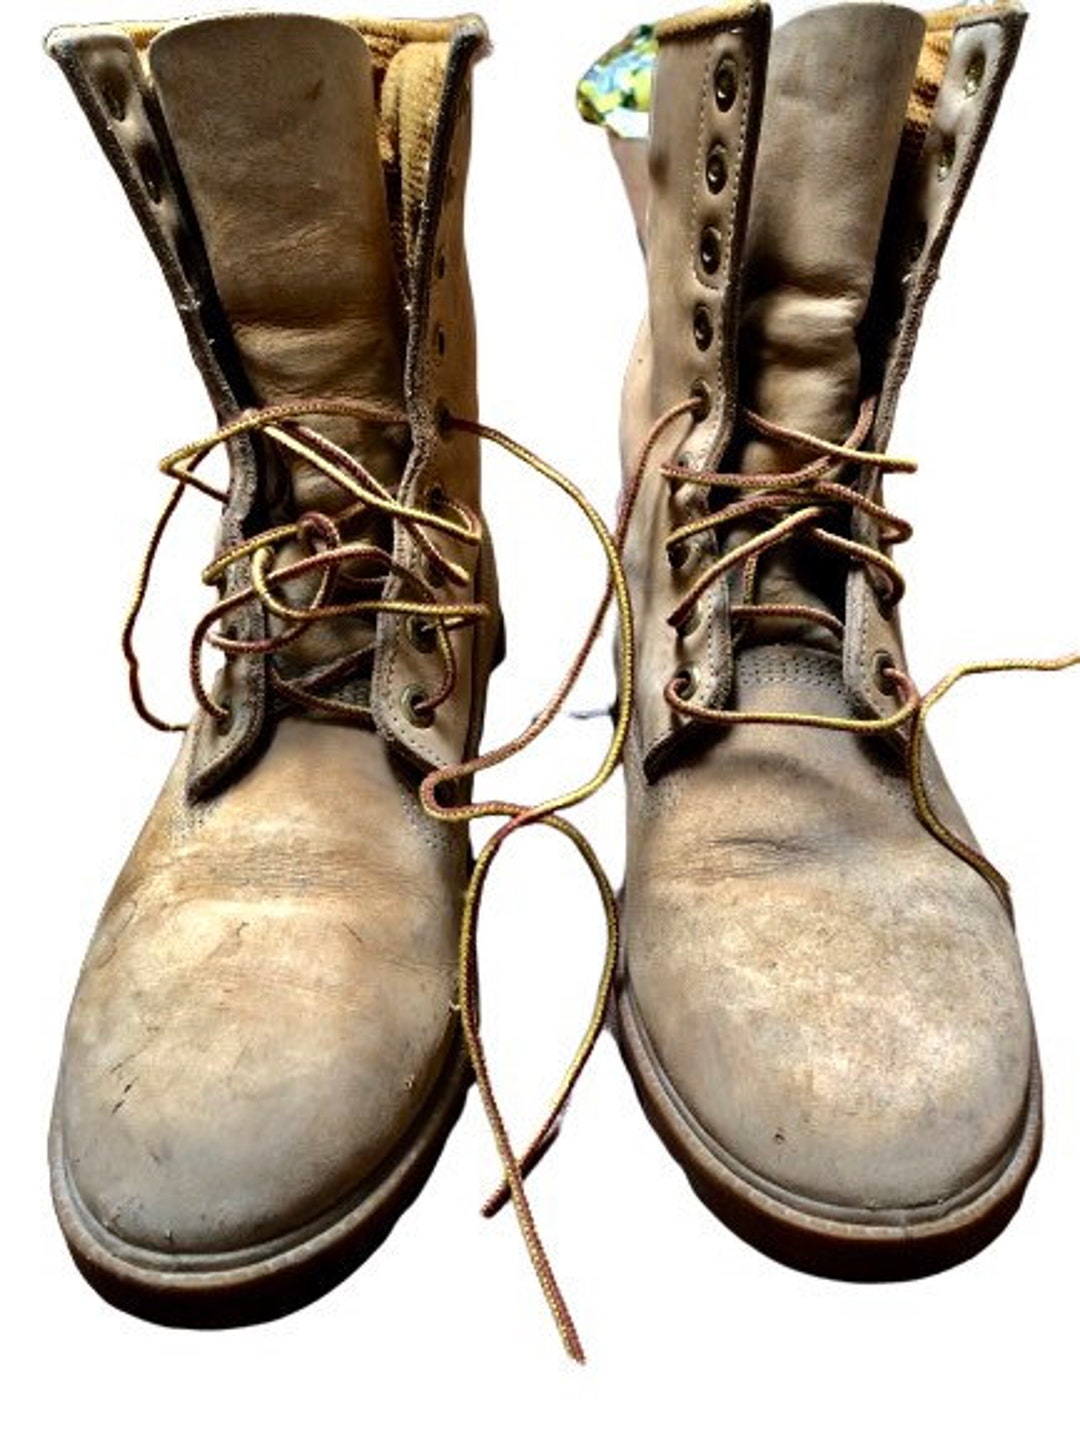 Vintage Boots USA Size 10 Lace up Work Boots Etsy Israel